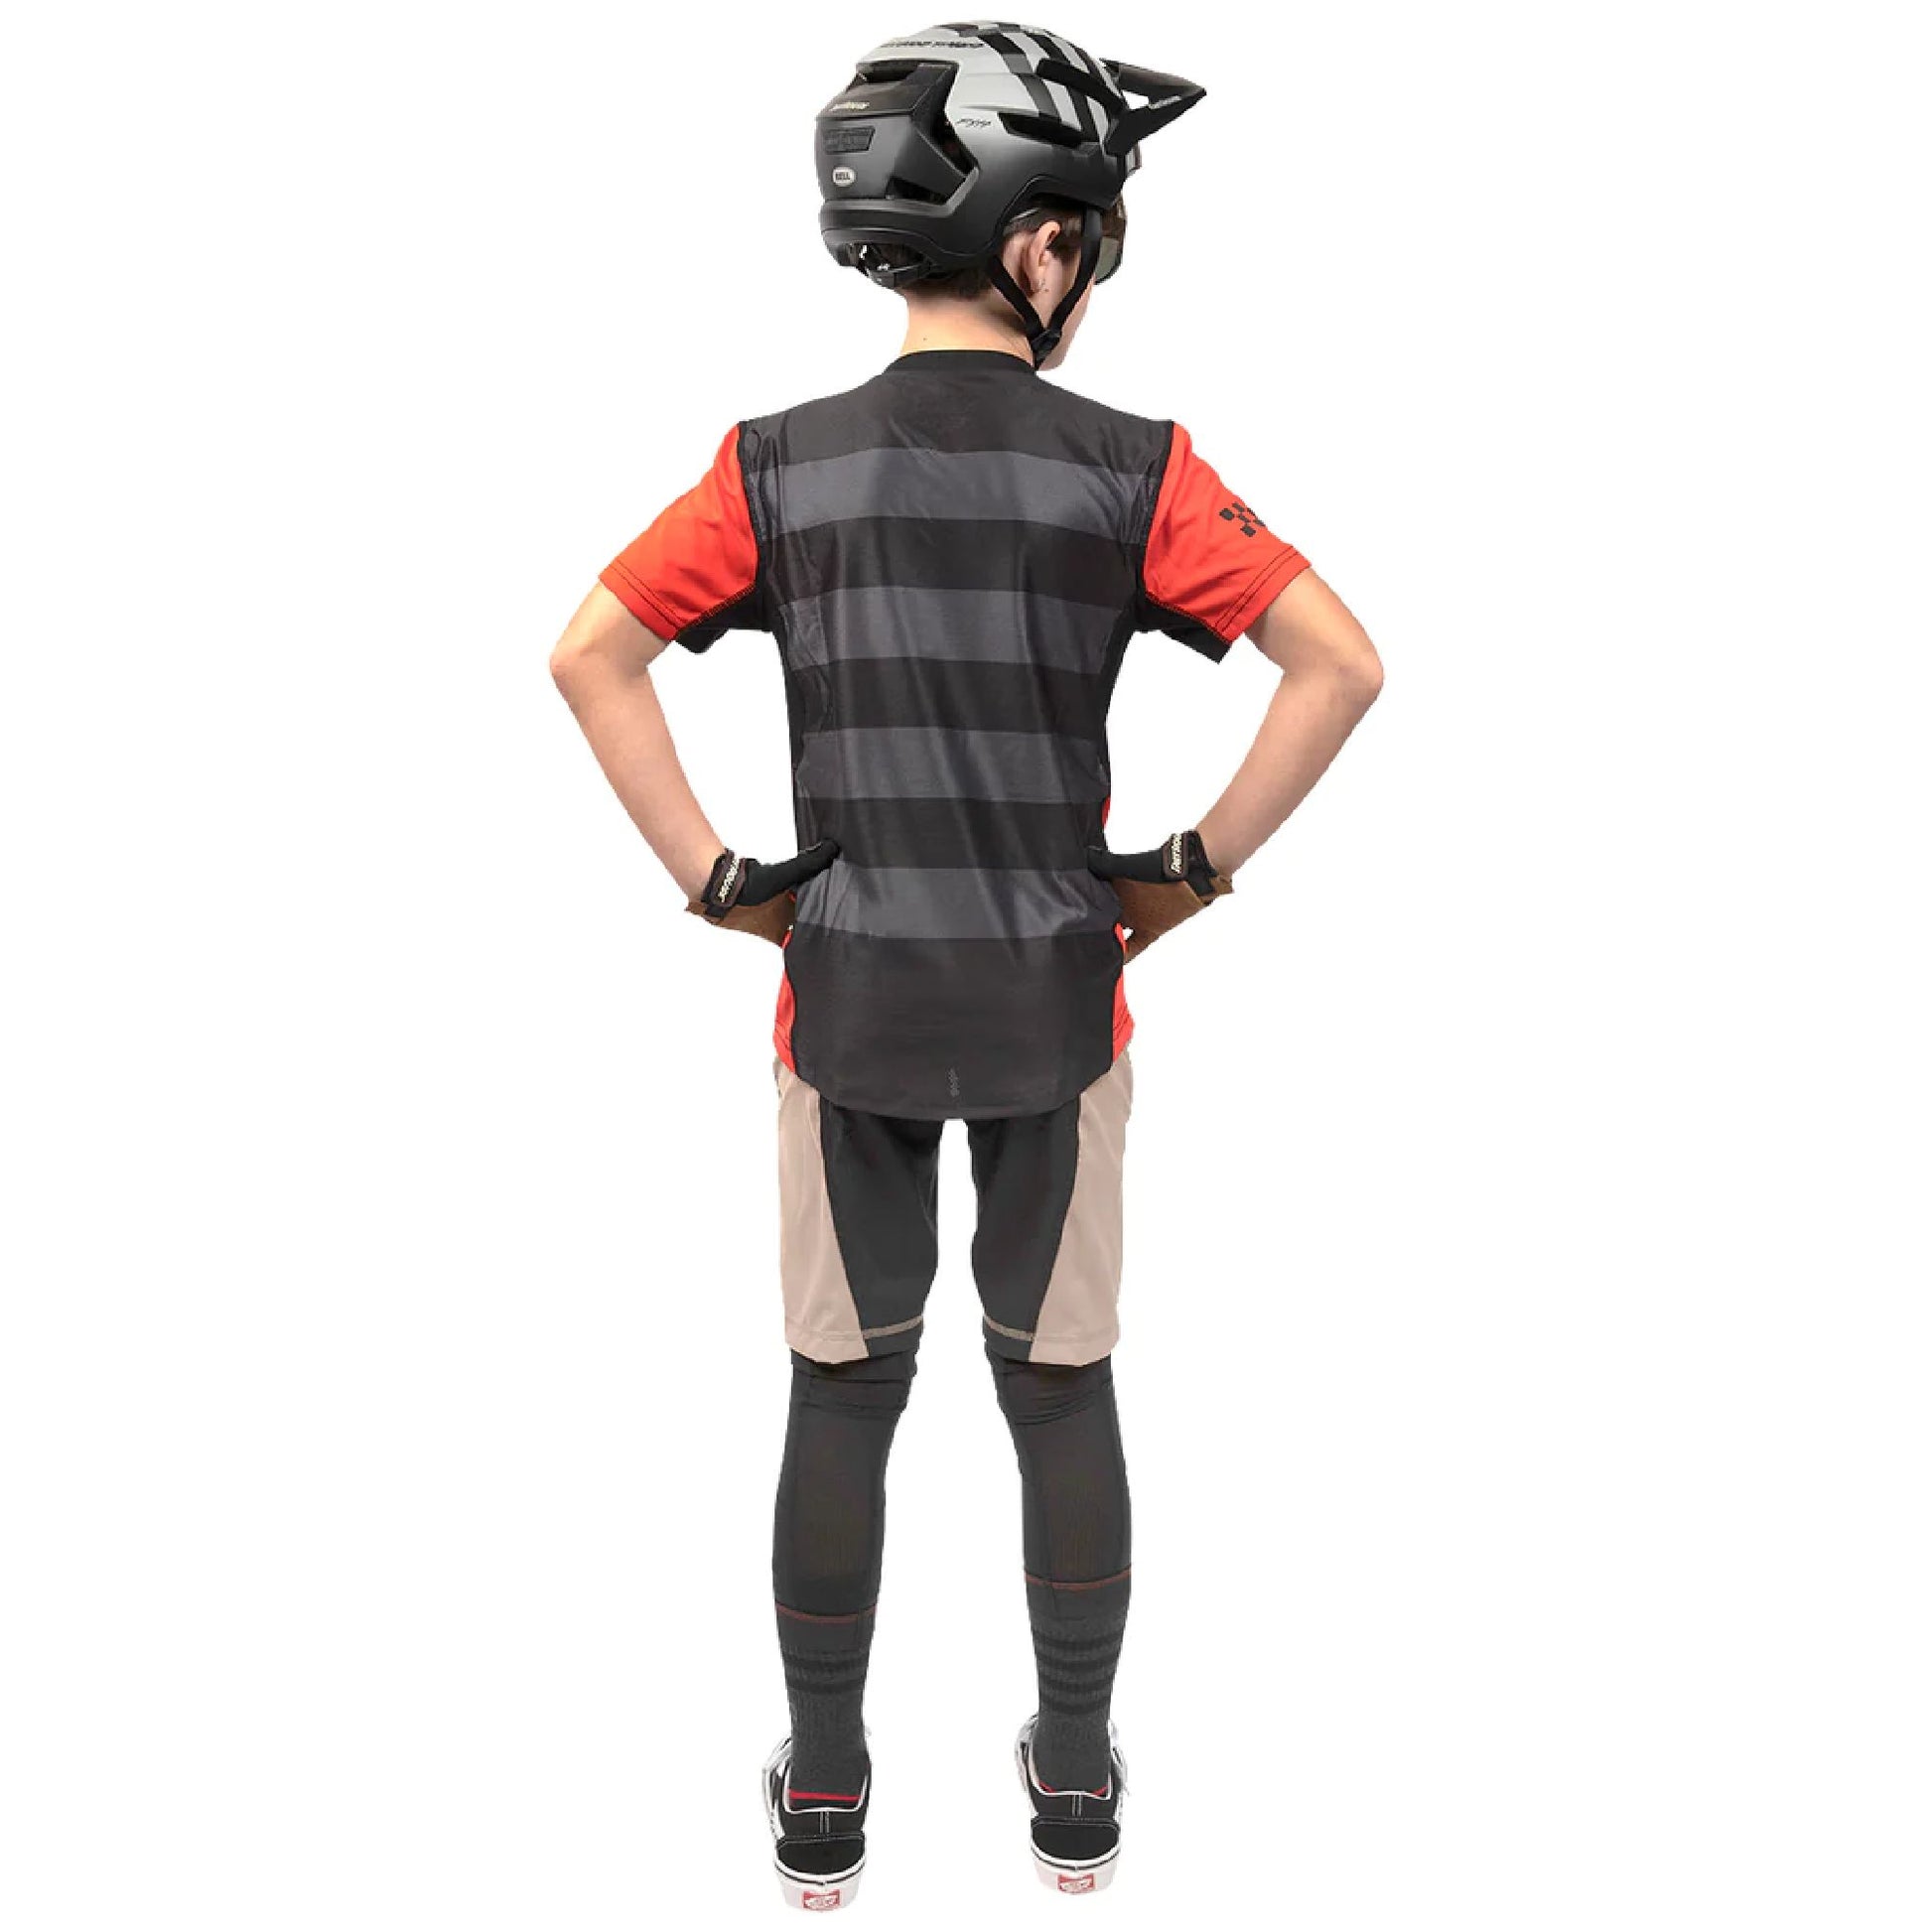 Fasthouse Youth Ronin Alloy SS Jersey Red Bike Jerseys